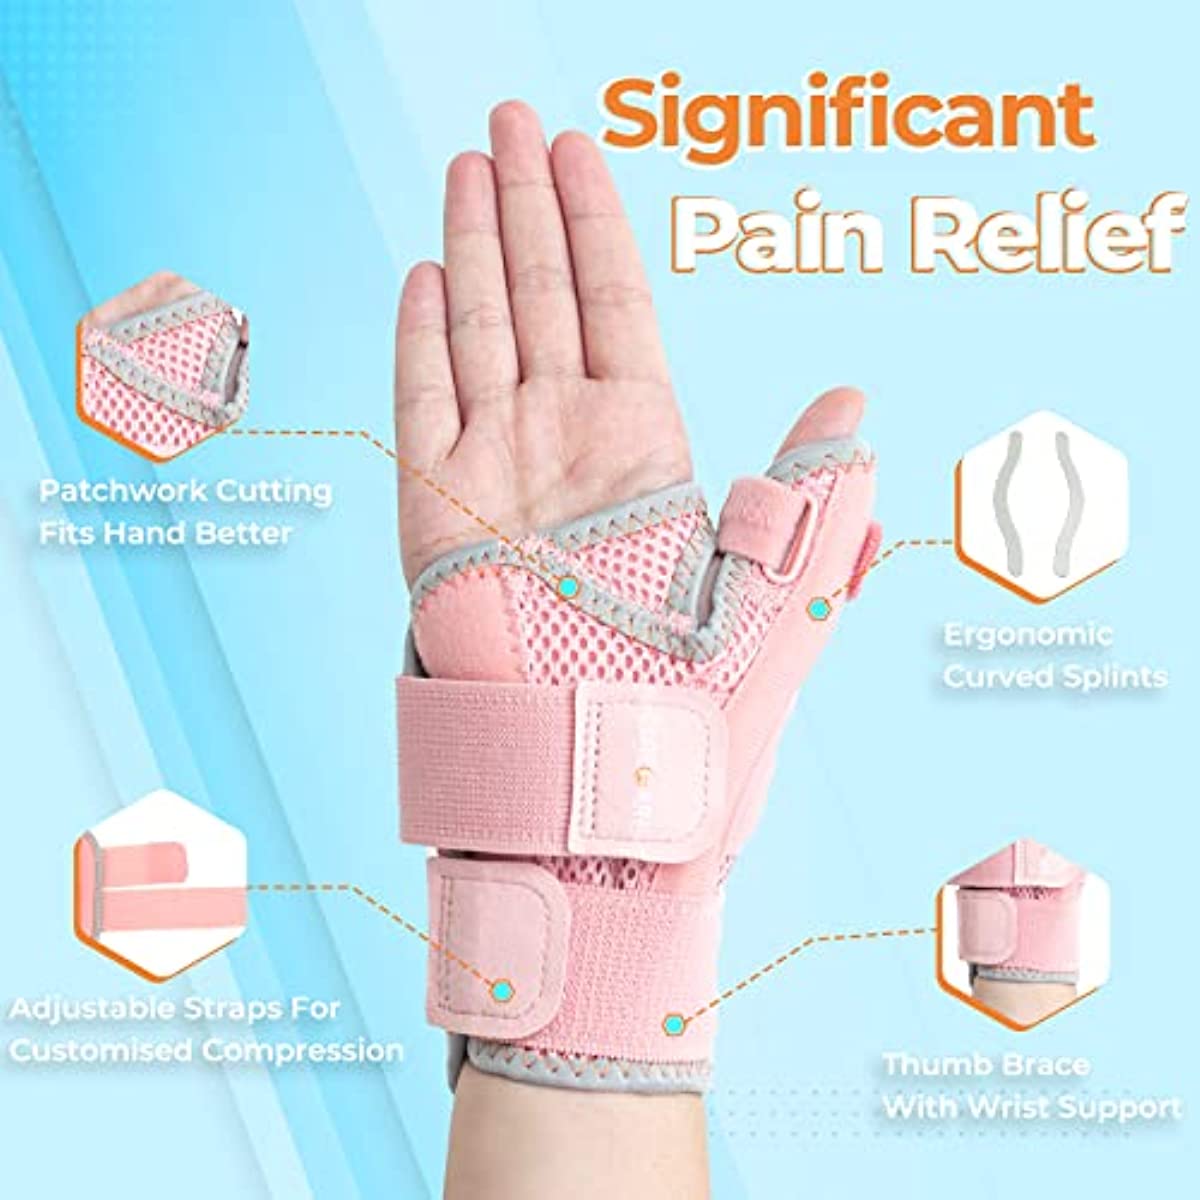 2022 New Upgraded Thumb Splint for Right & Left Hand, Reversible Thumb Brace for Arthritis Pain And Support, Thumb Stabilizer for Sprains, Tendonitis Relief, One Size Fits Any Hand (Pink)